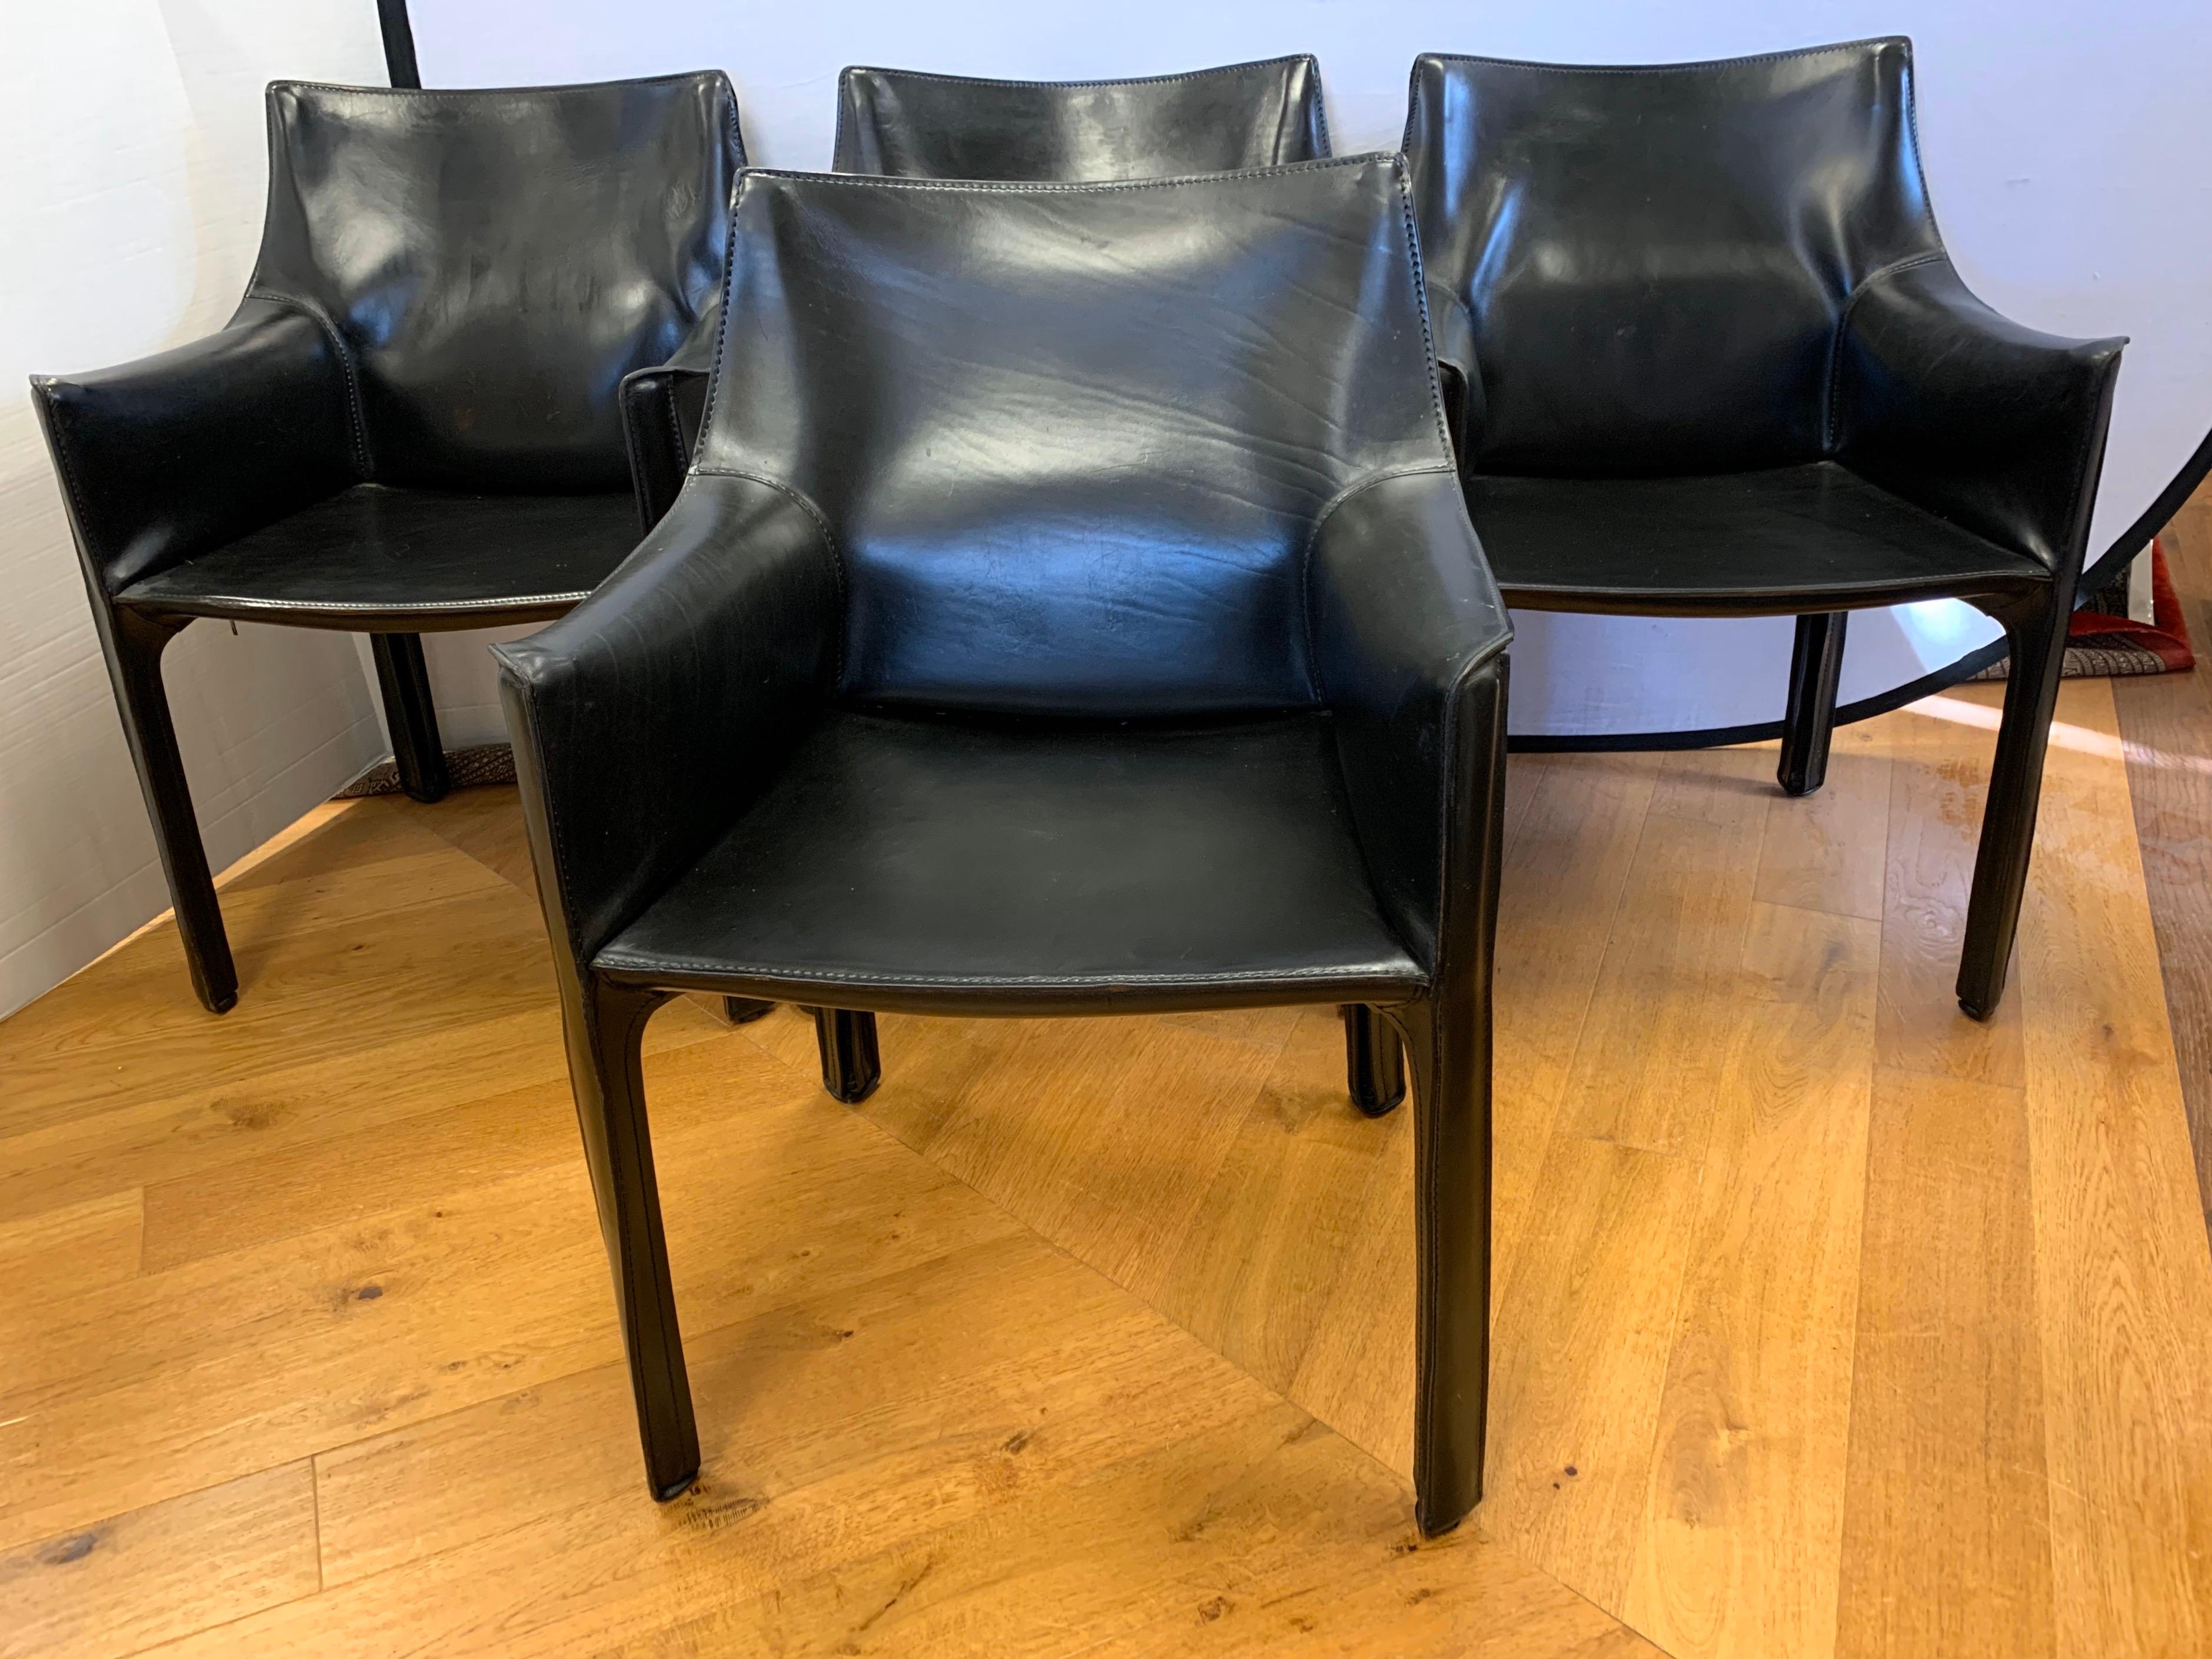 Coveted leather Mario Bellini designed cab chair for Cassina.
All hallmarks present. These are the midcentury classics that feature the zippers underneath.